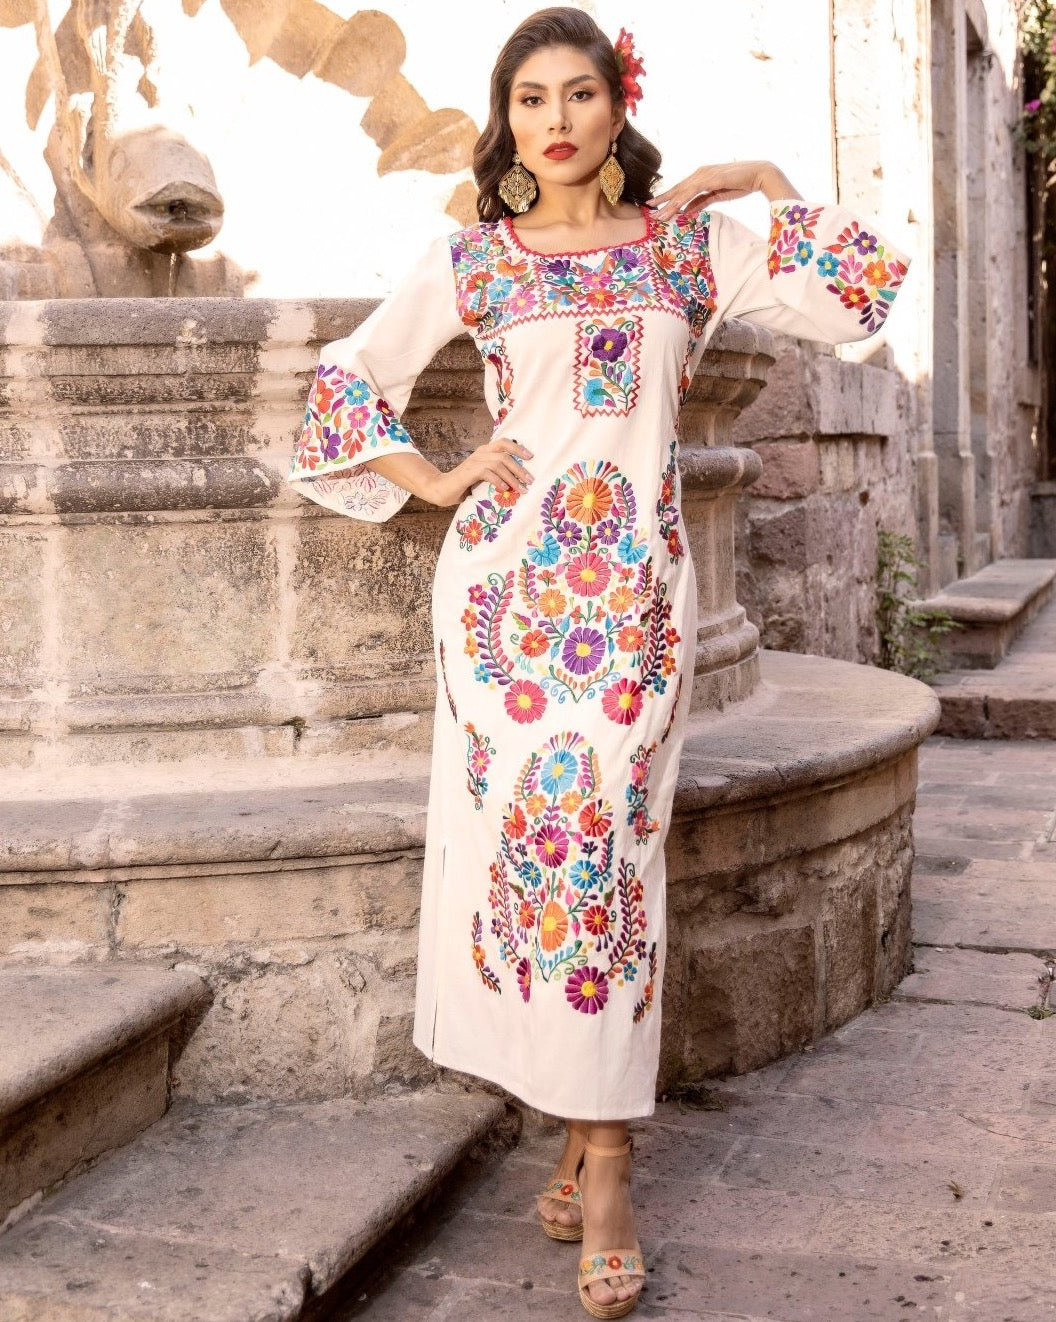 Floral Embroidered Traditional Mexican Dress in Beige